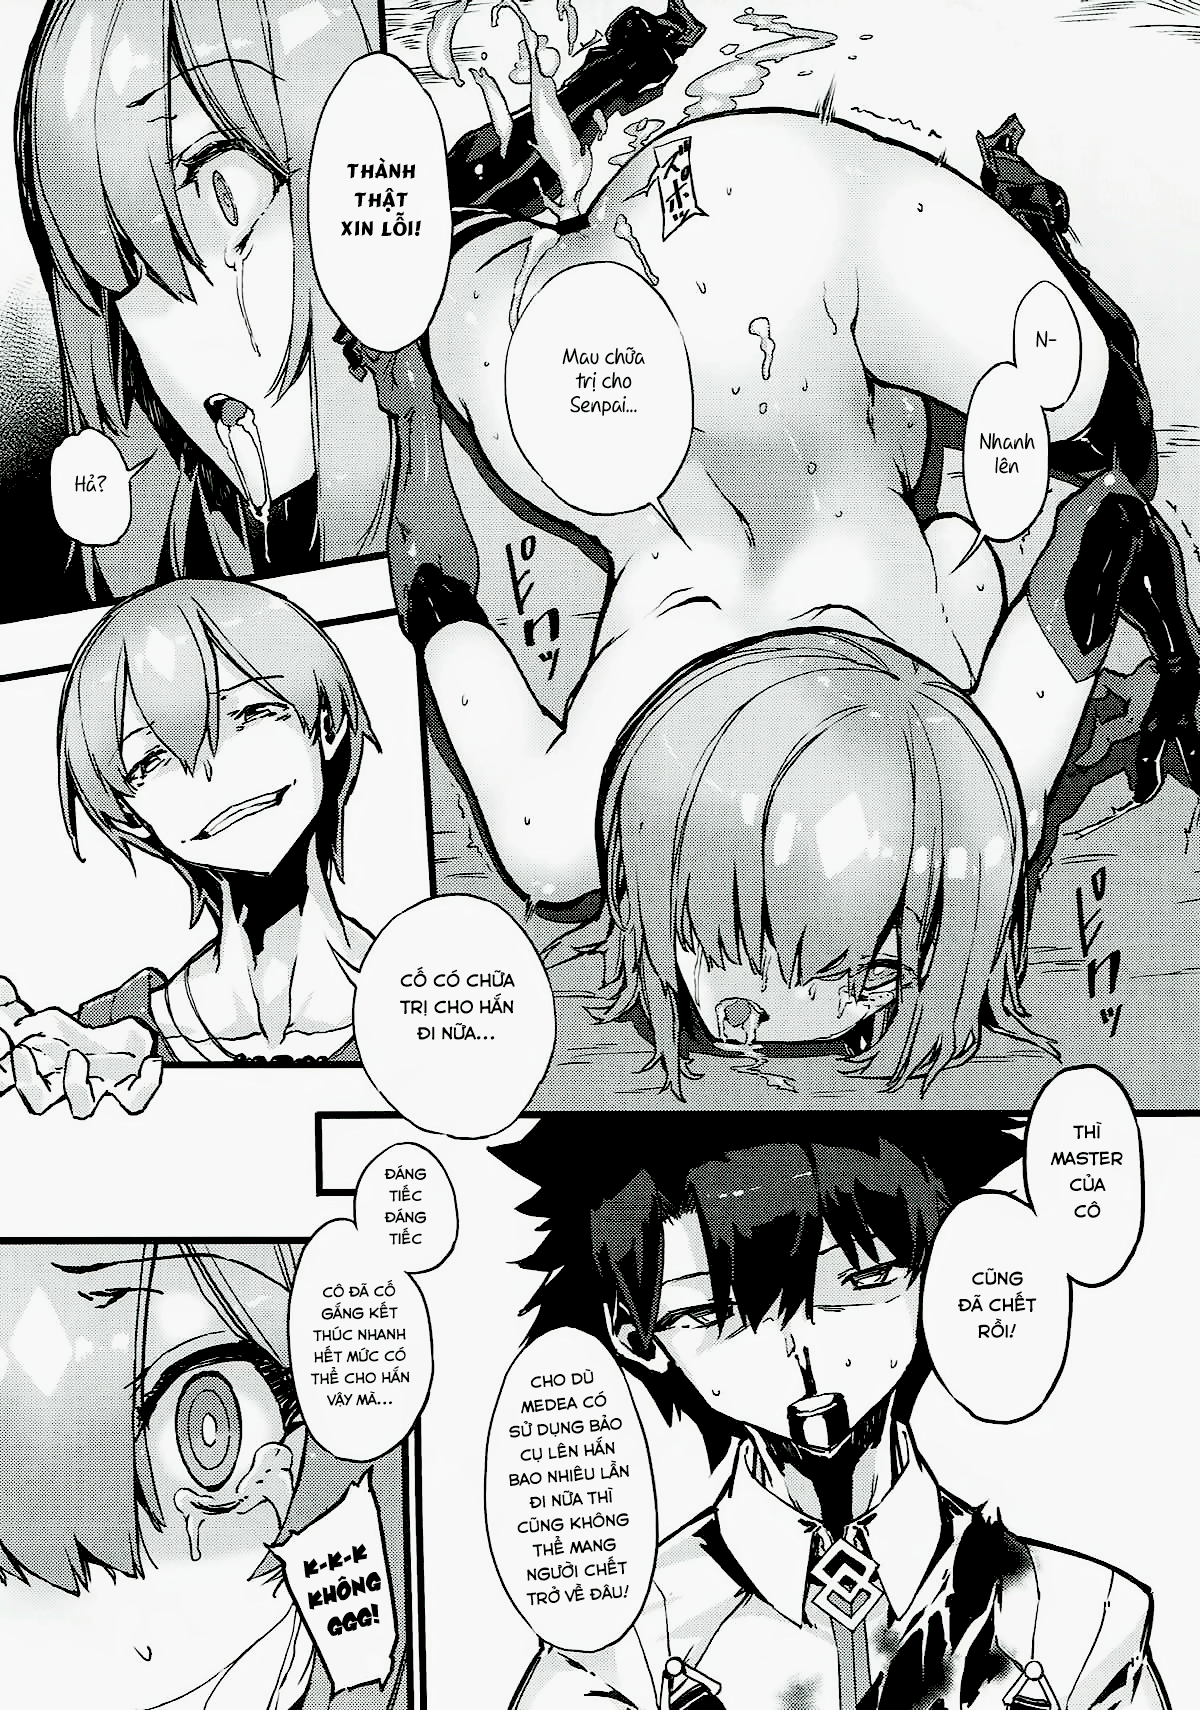 (C93) [Kenja Time (Zutta)] Bad End Catharsis Vol. 8 (Fate/Grand Order) [Vietnamese Tiếng Việt] [T.K Translation Team - Seian] (C93) [けんじゃたいむ (Zutta)] Bad End Catharsis Vol.8 (Fate/Grand Order) [ベトナム翻訳]